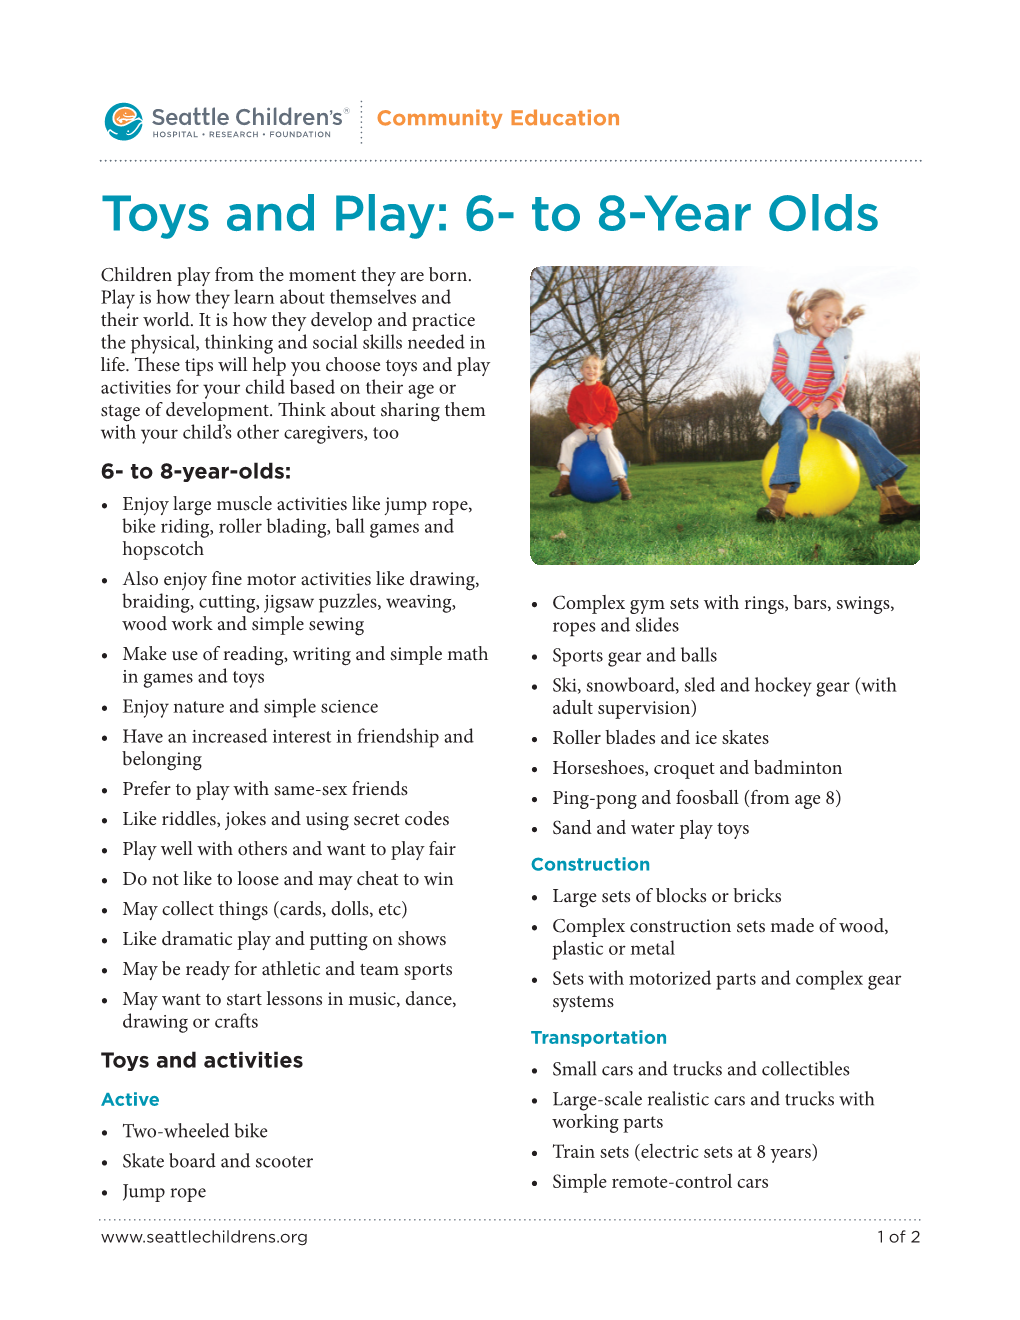 Toys and Play: 6- to 8-Year Olds